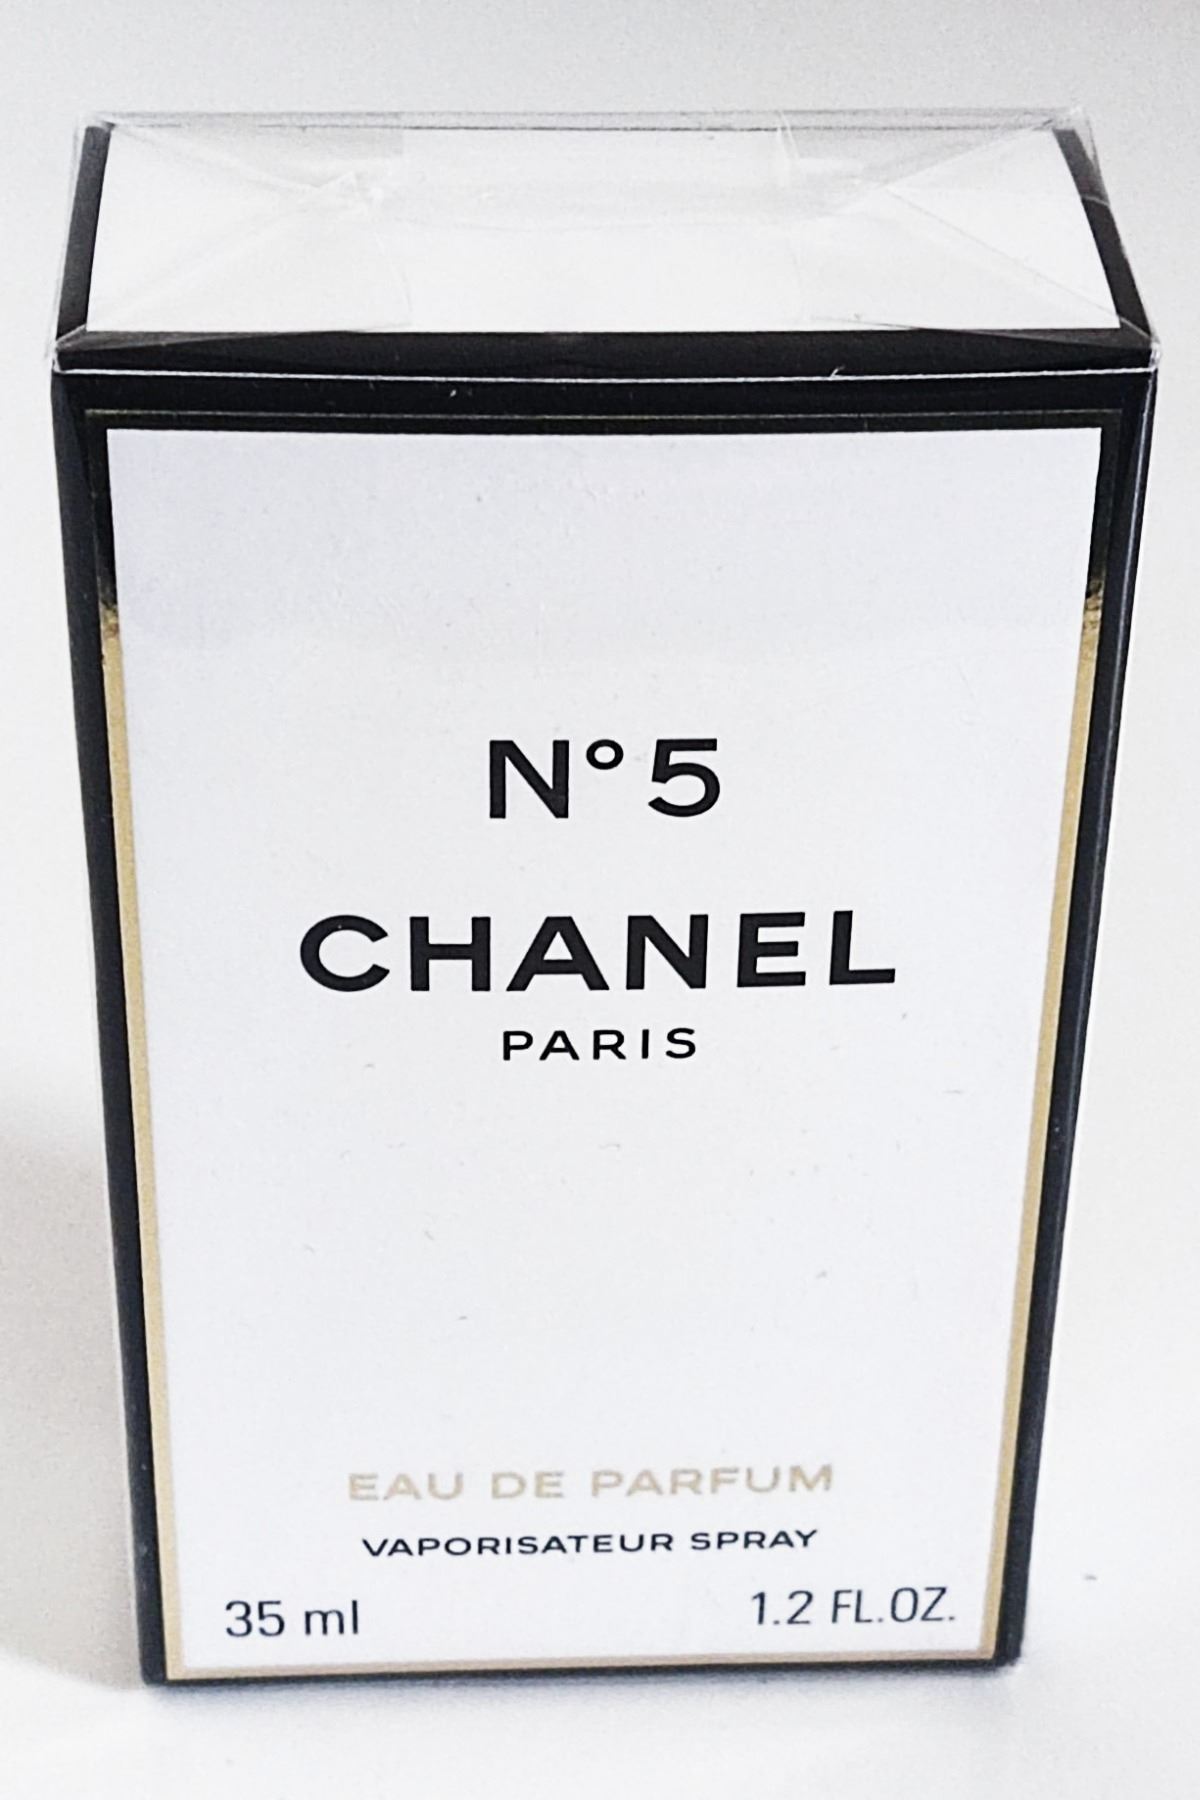 A new sealed Chanel No.